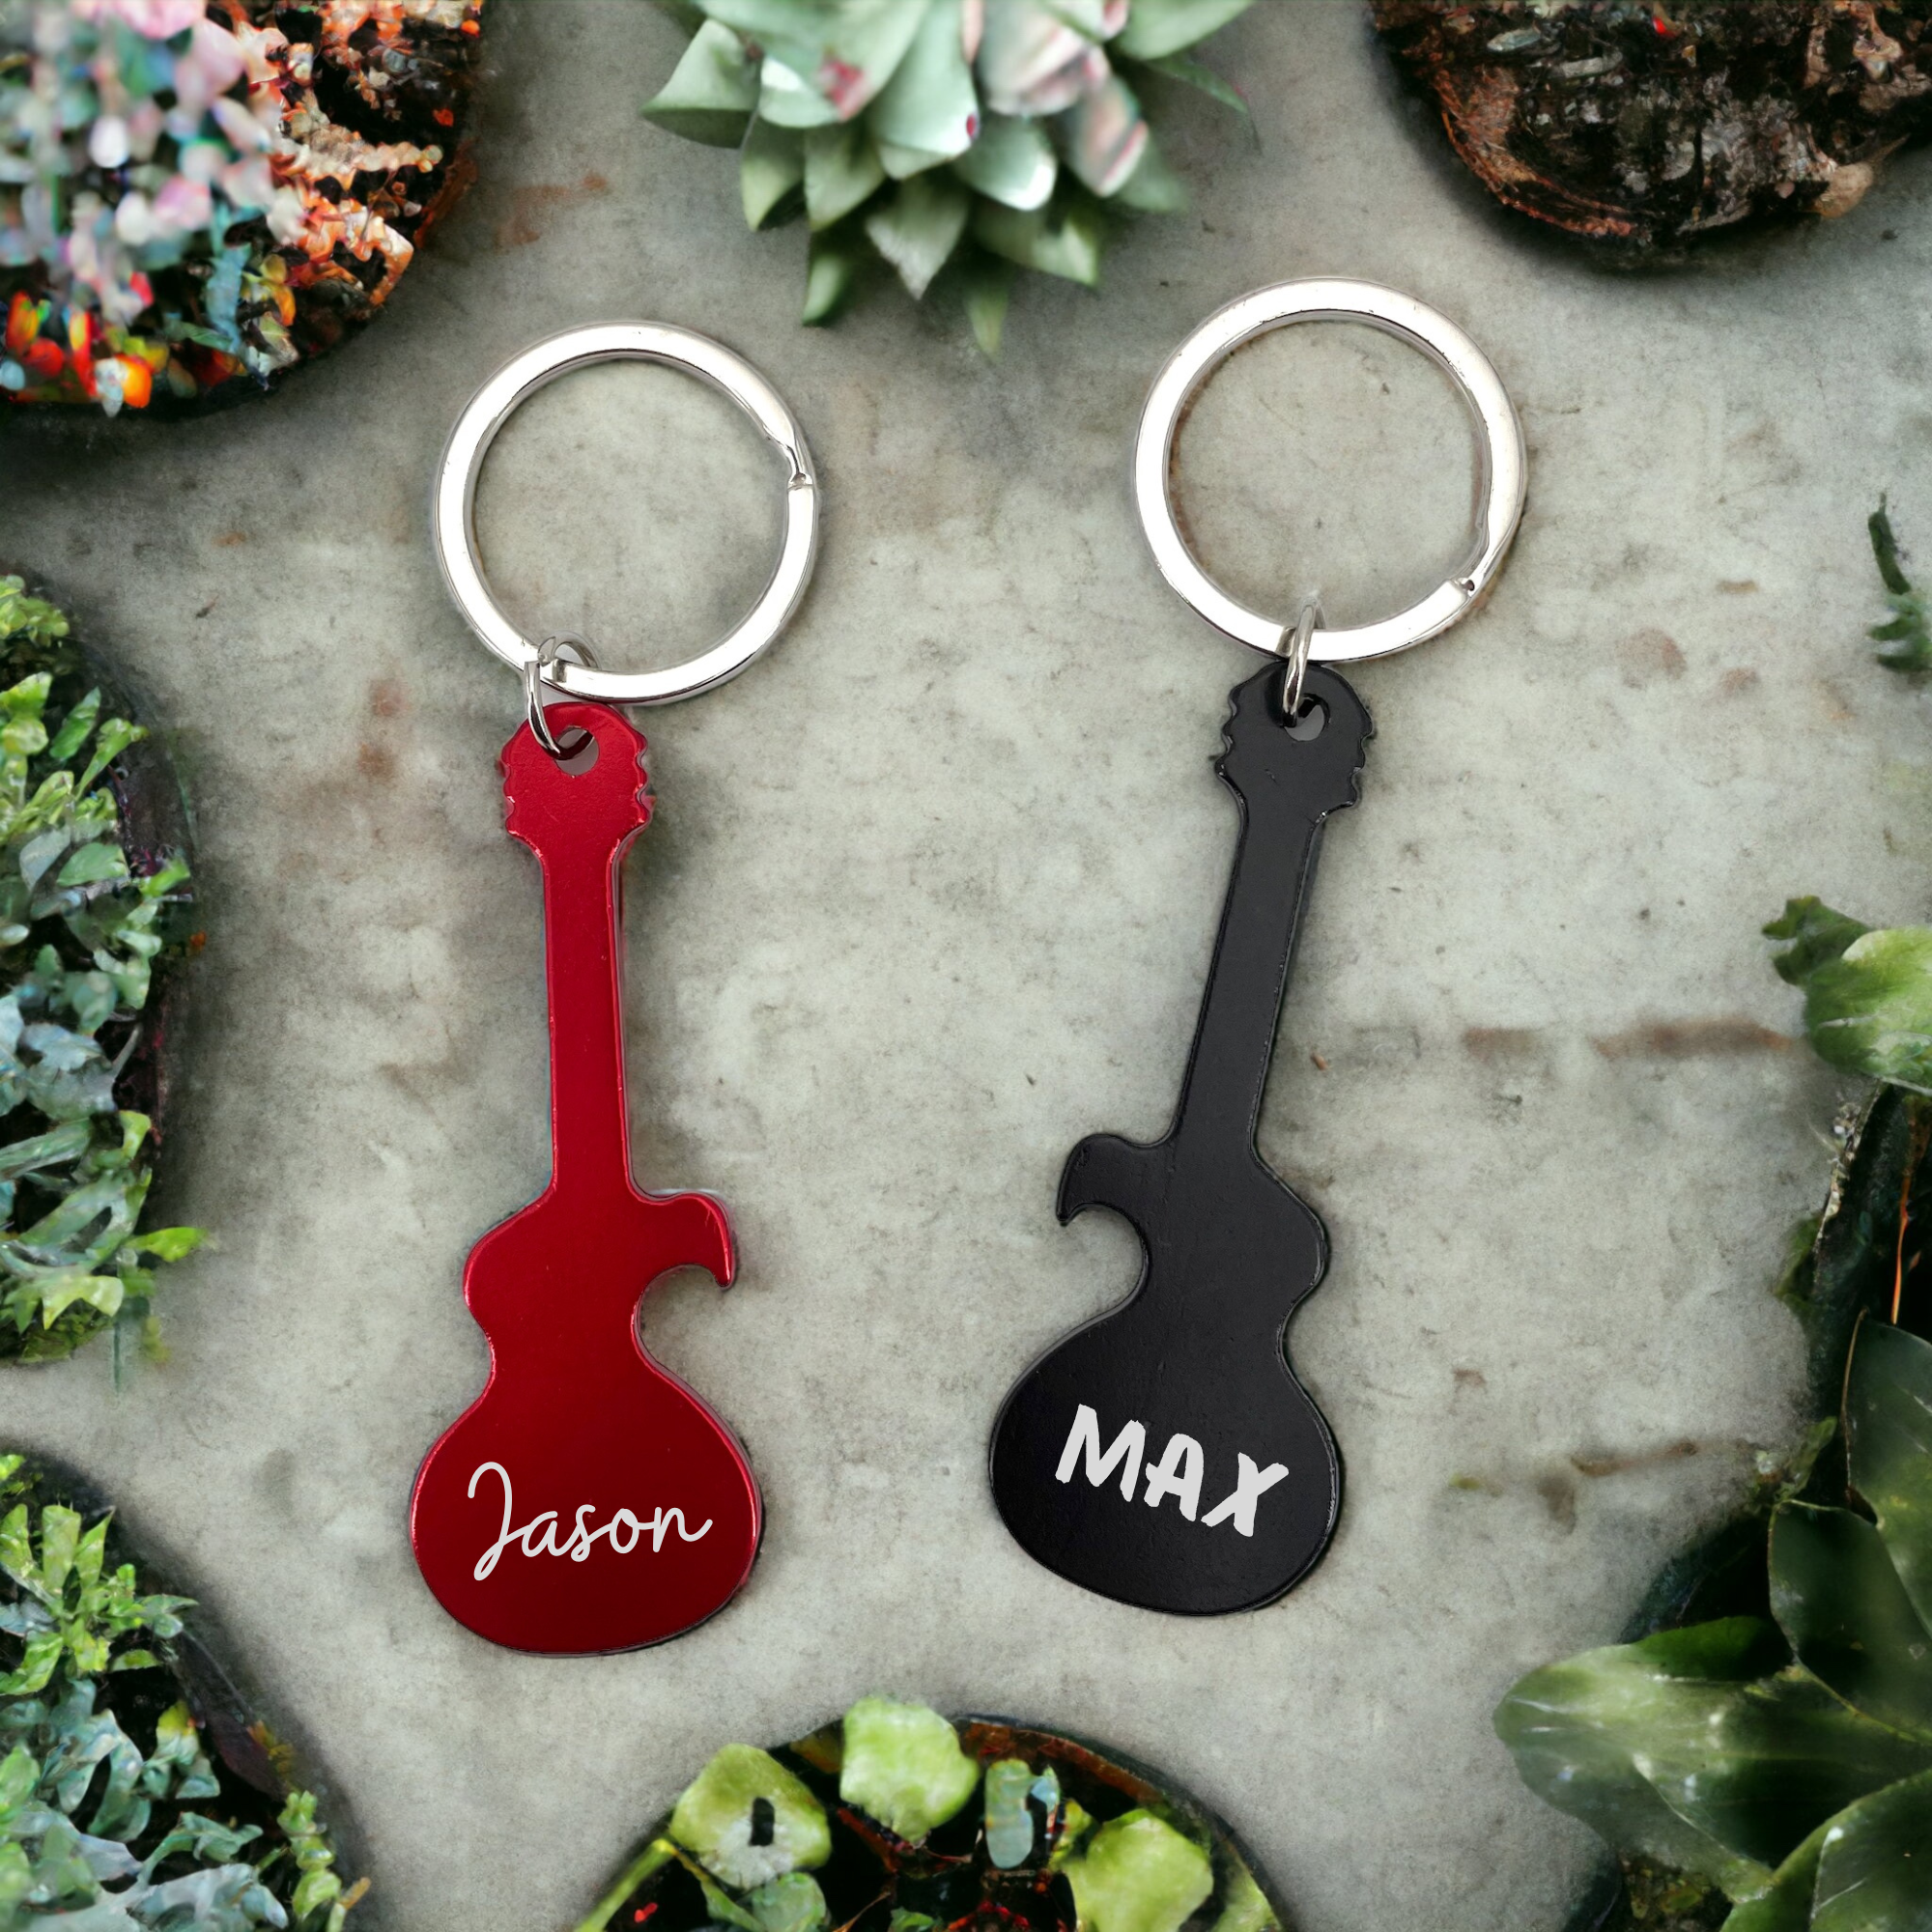 Guitar-Shaped Metal Keyring and Bottle Opener - Customize with Your Name